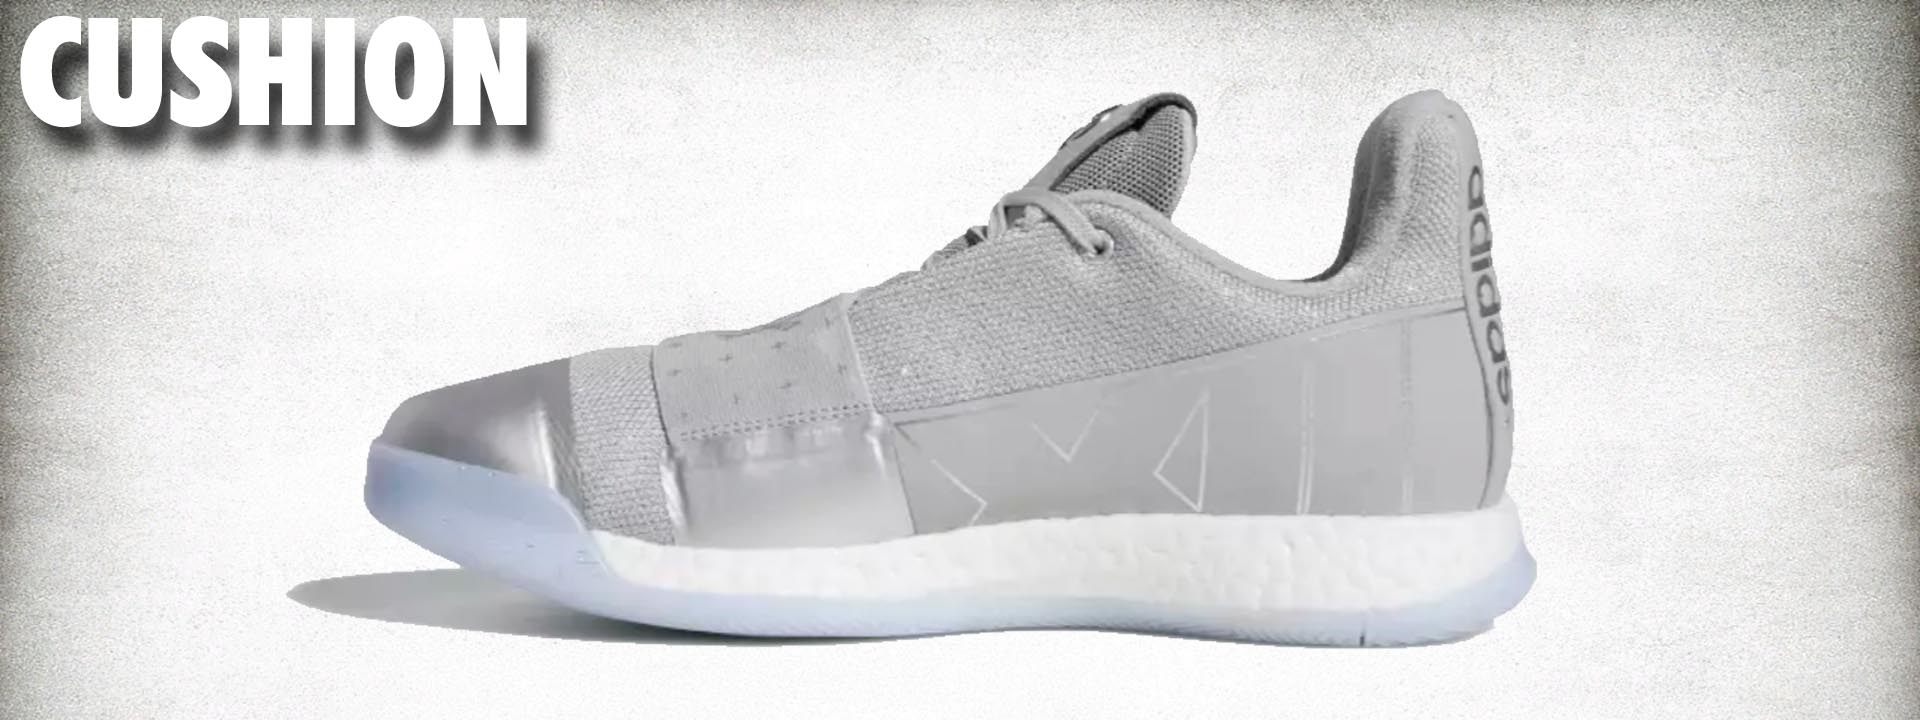 adidas Harden Vol 3 Performance Review 